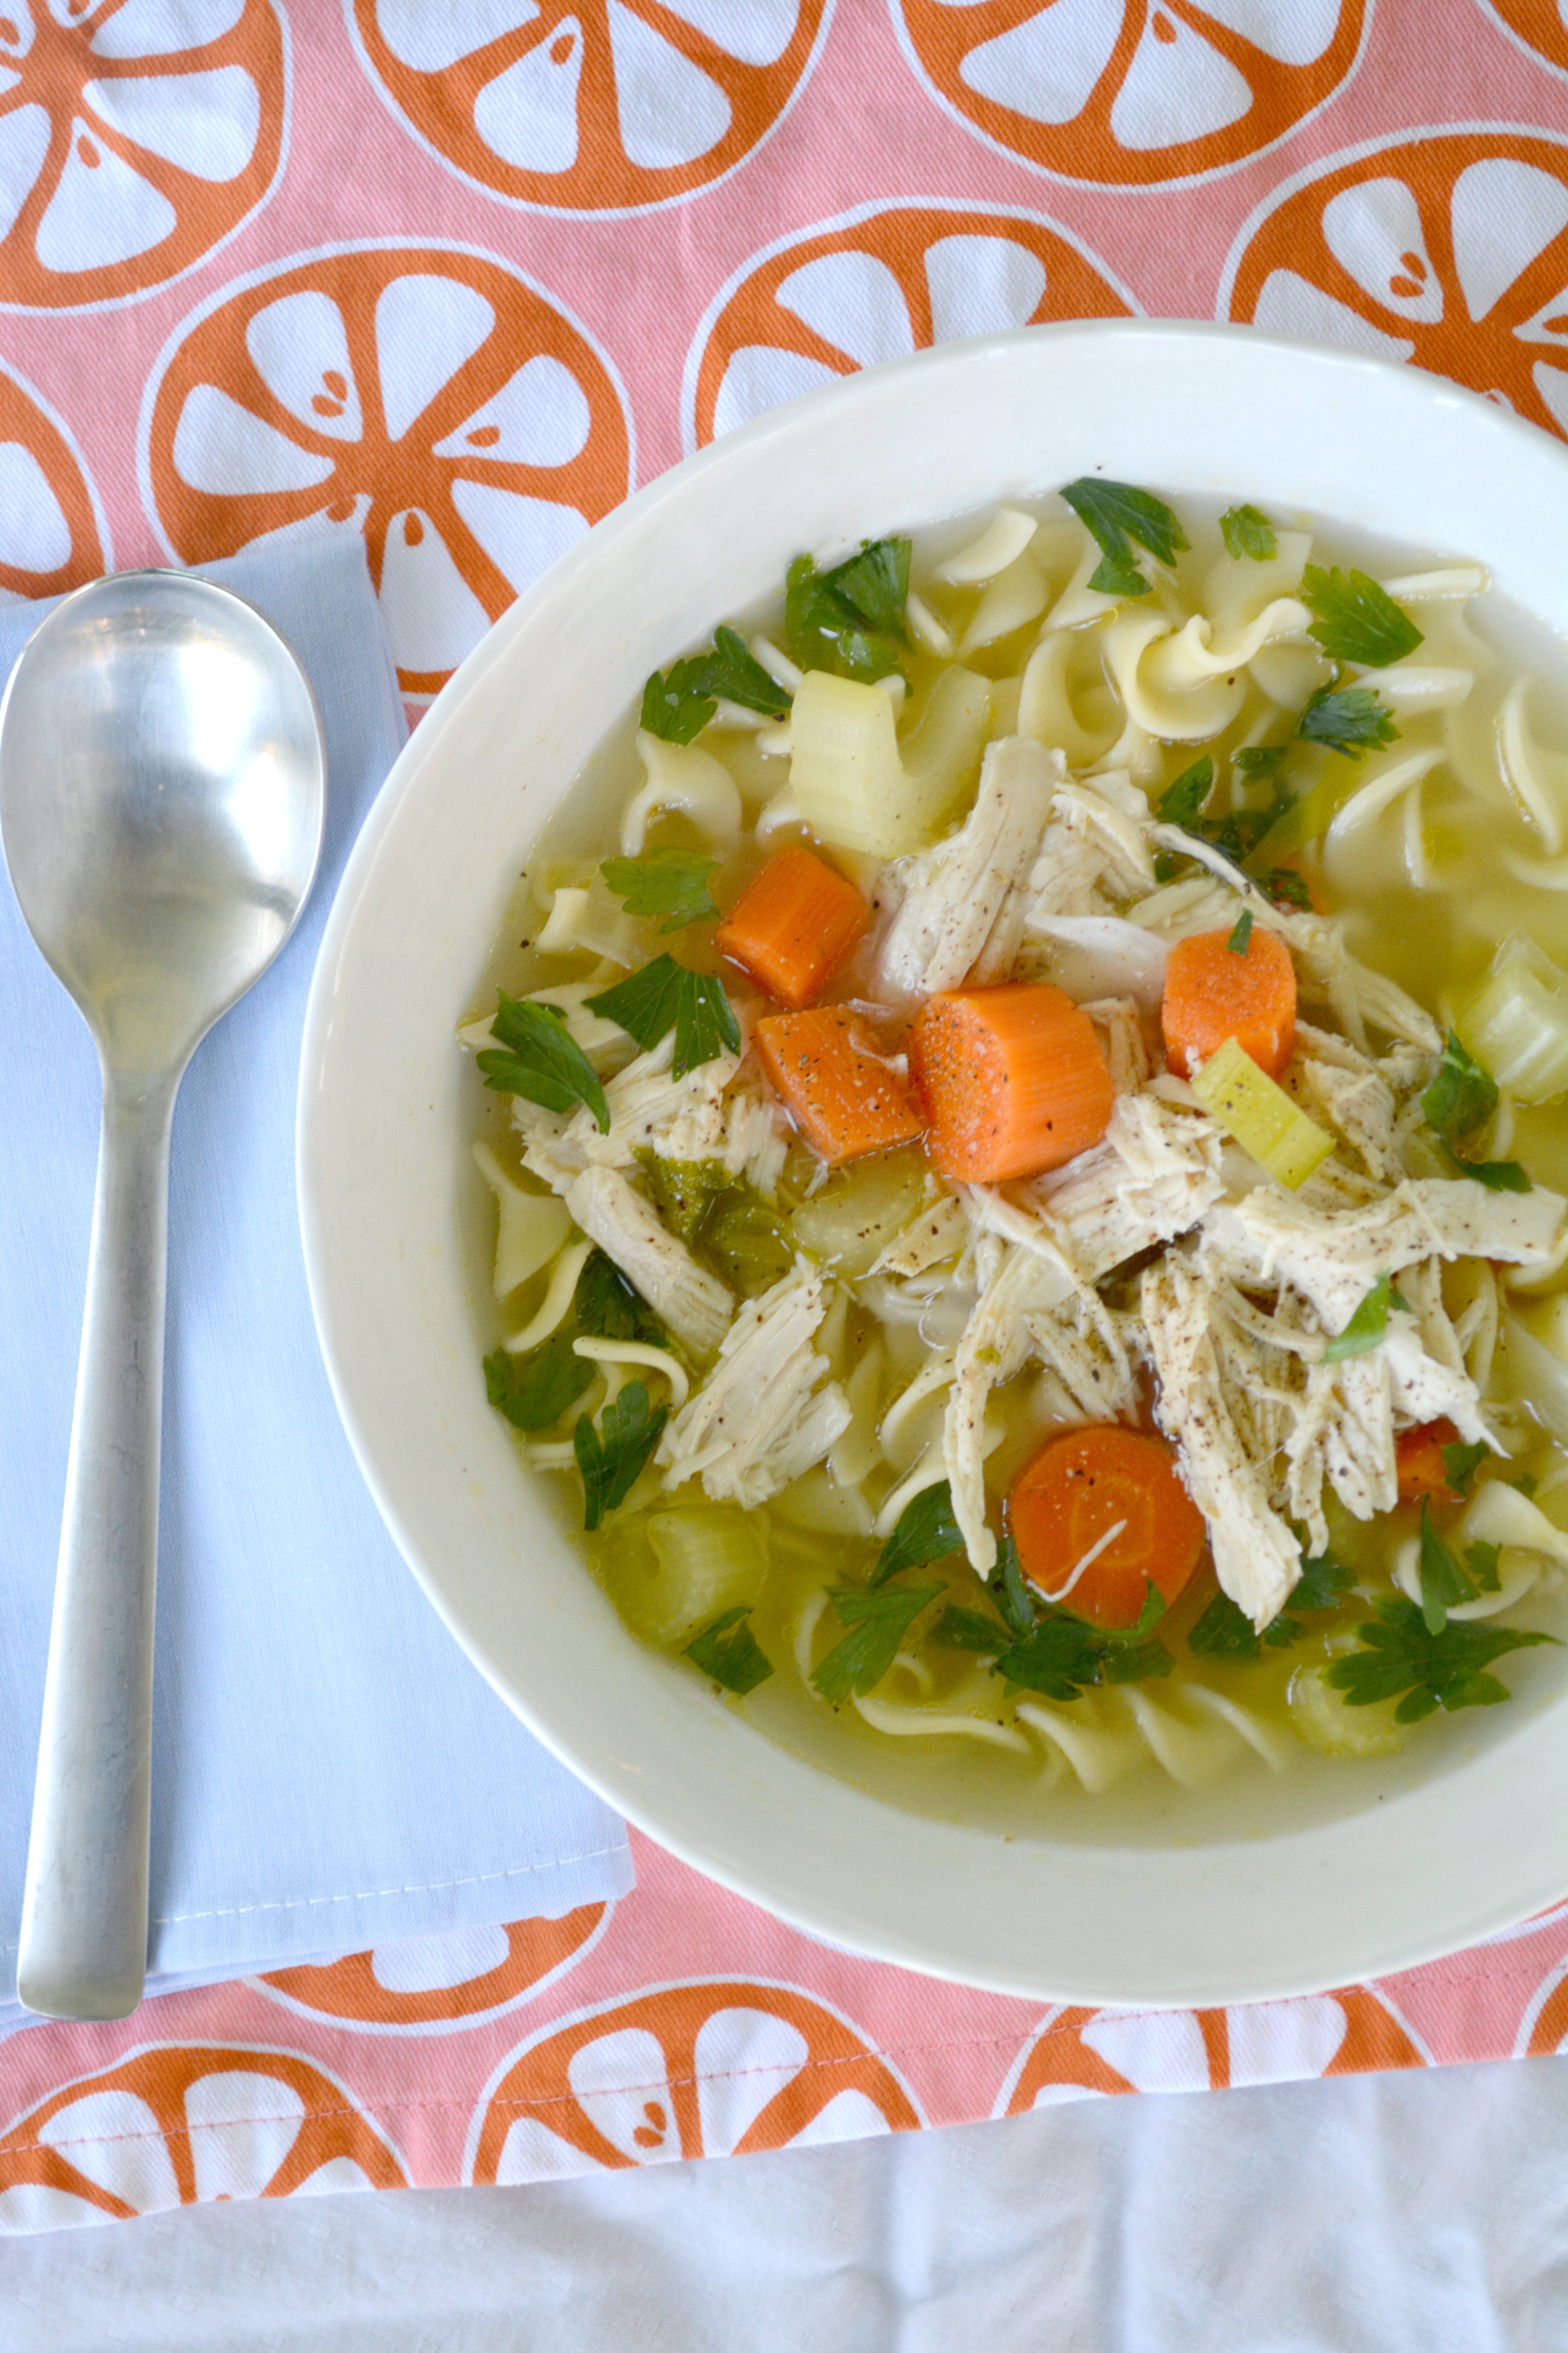 Homemade Chicken Noodle Soup (from scratch!)